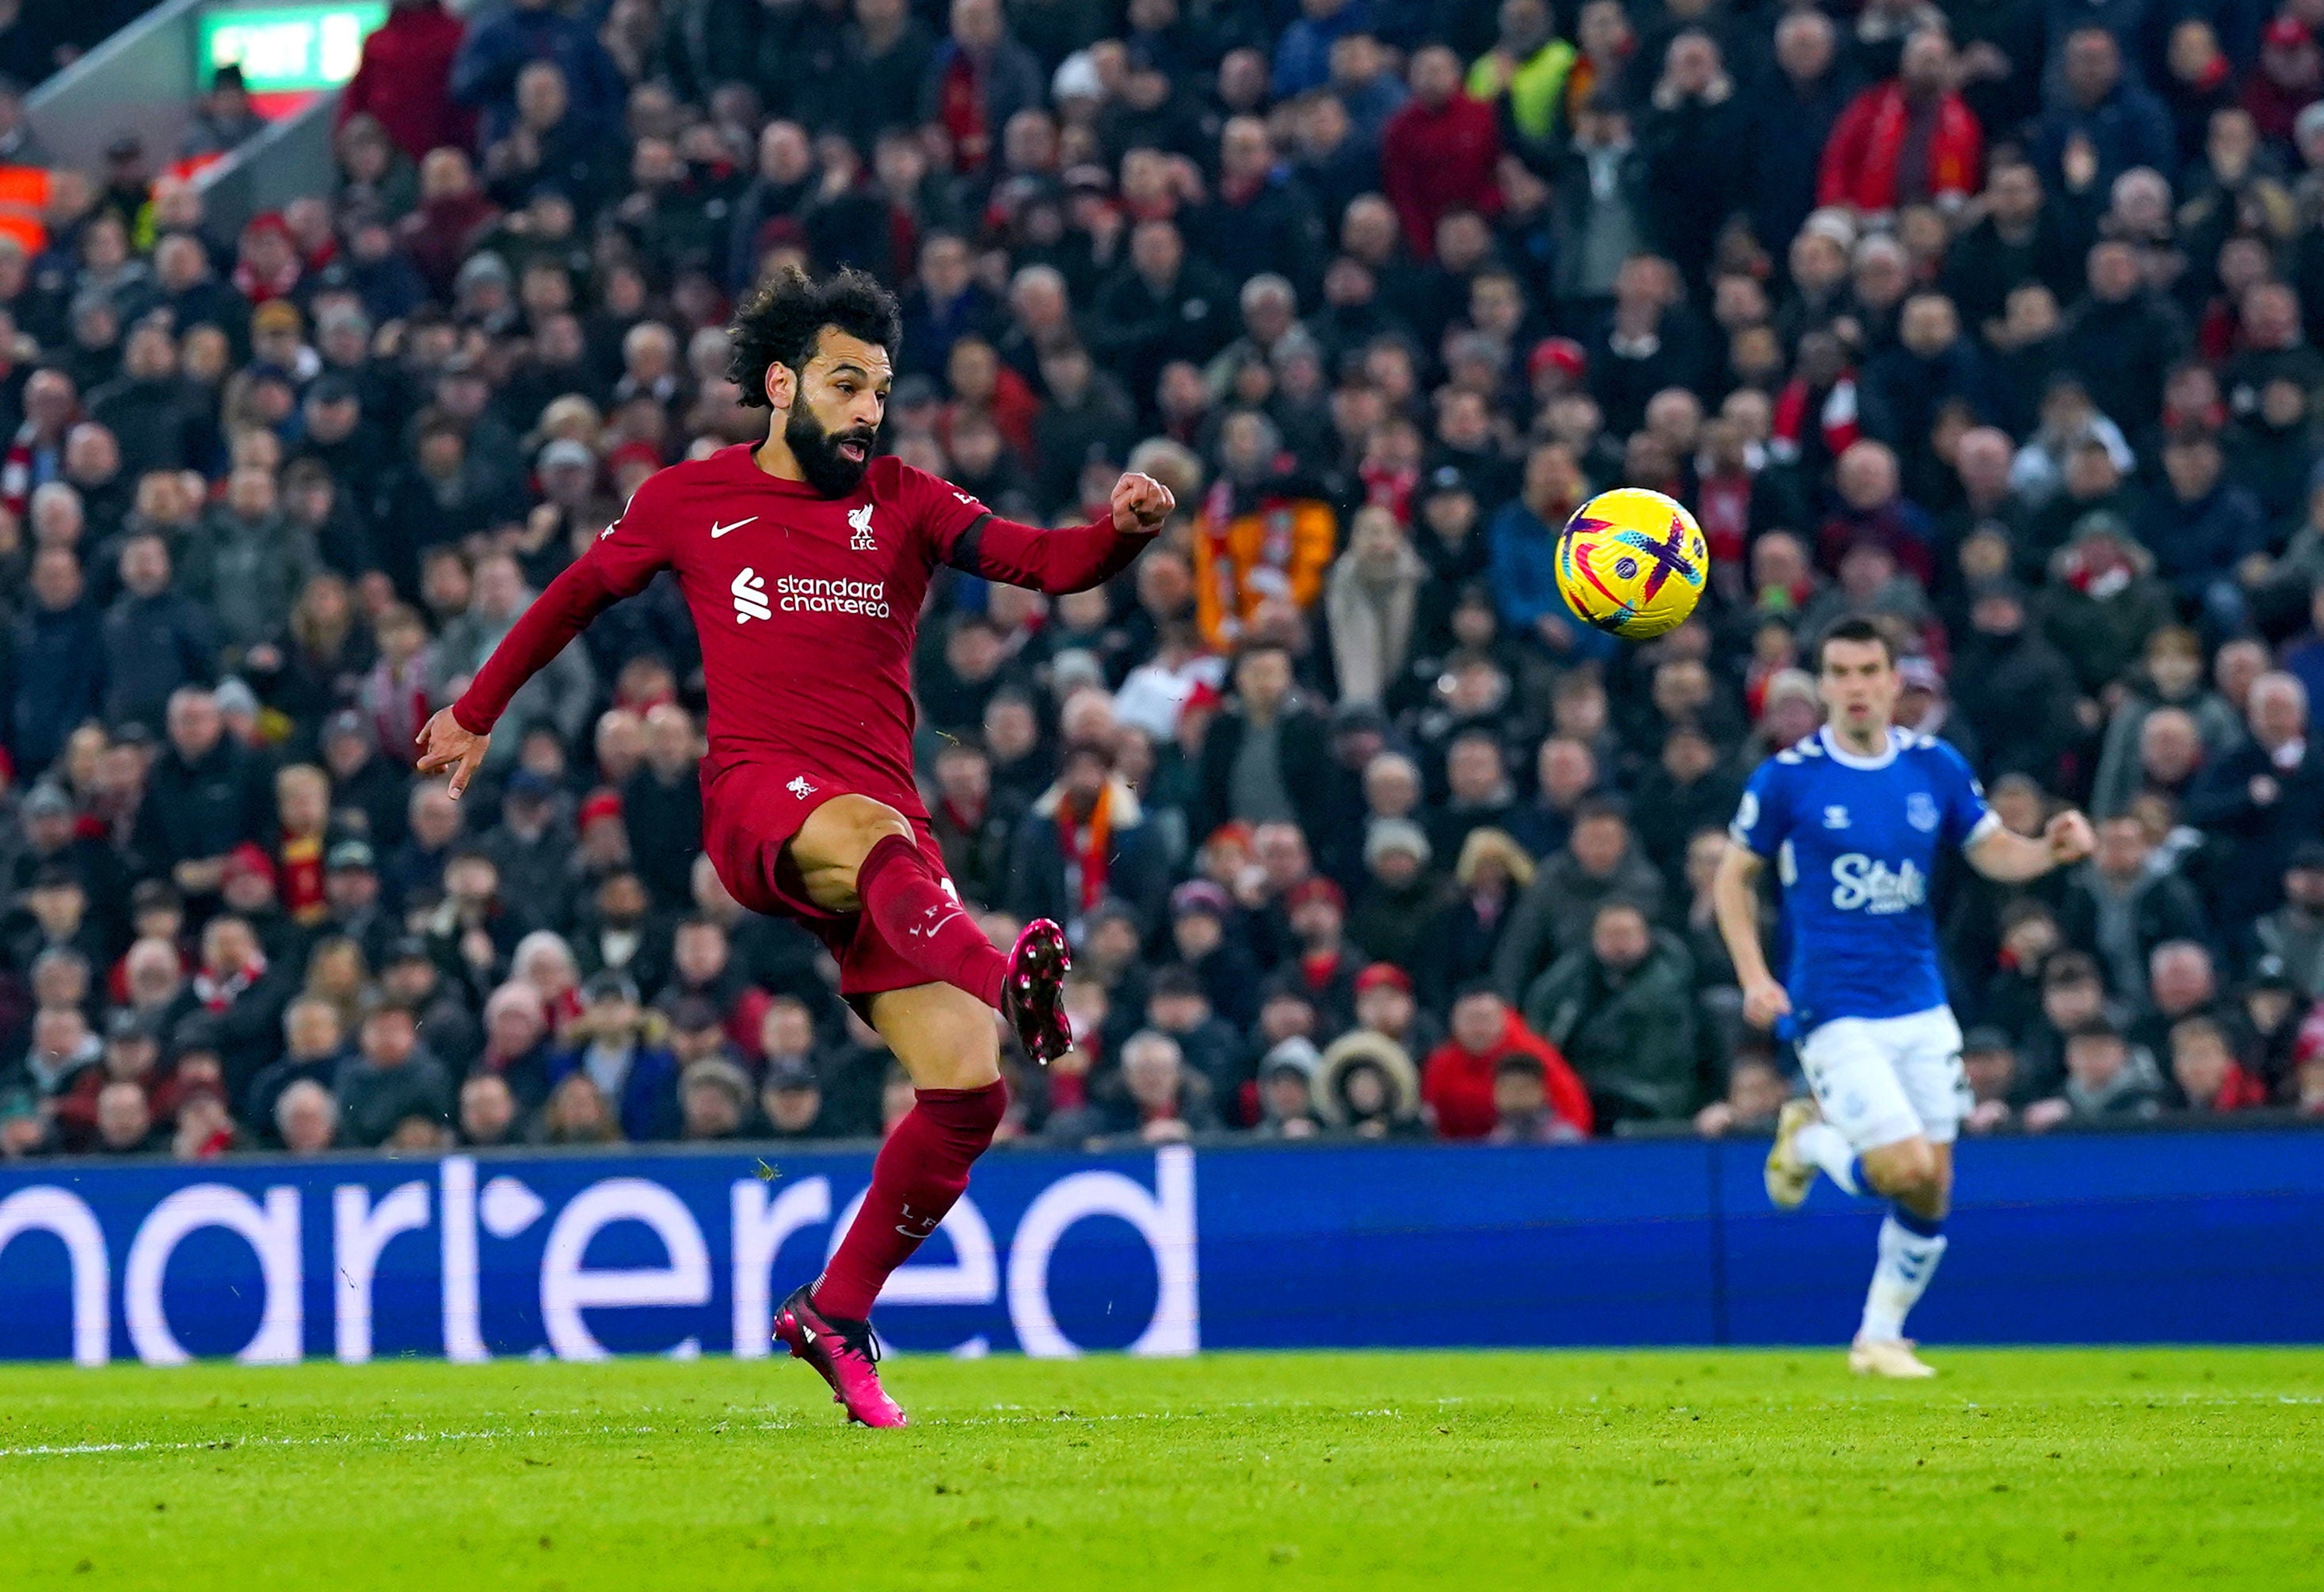 Mohamed Salah lifts the ball past Pickford for Liverpool’s opener